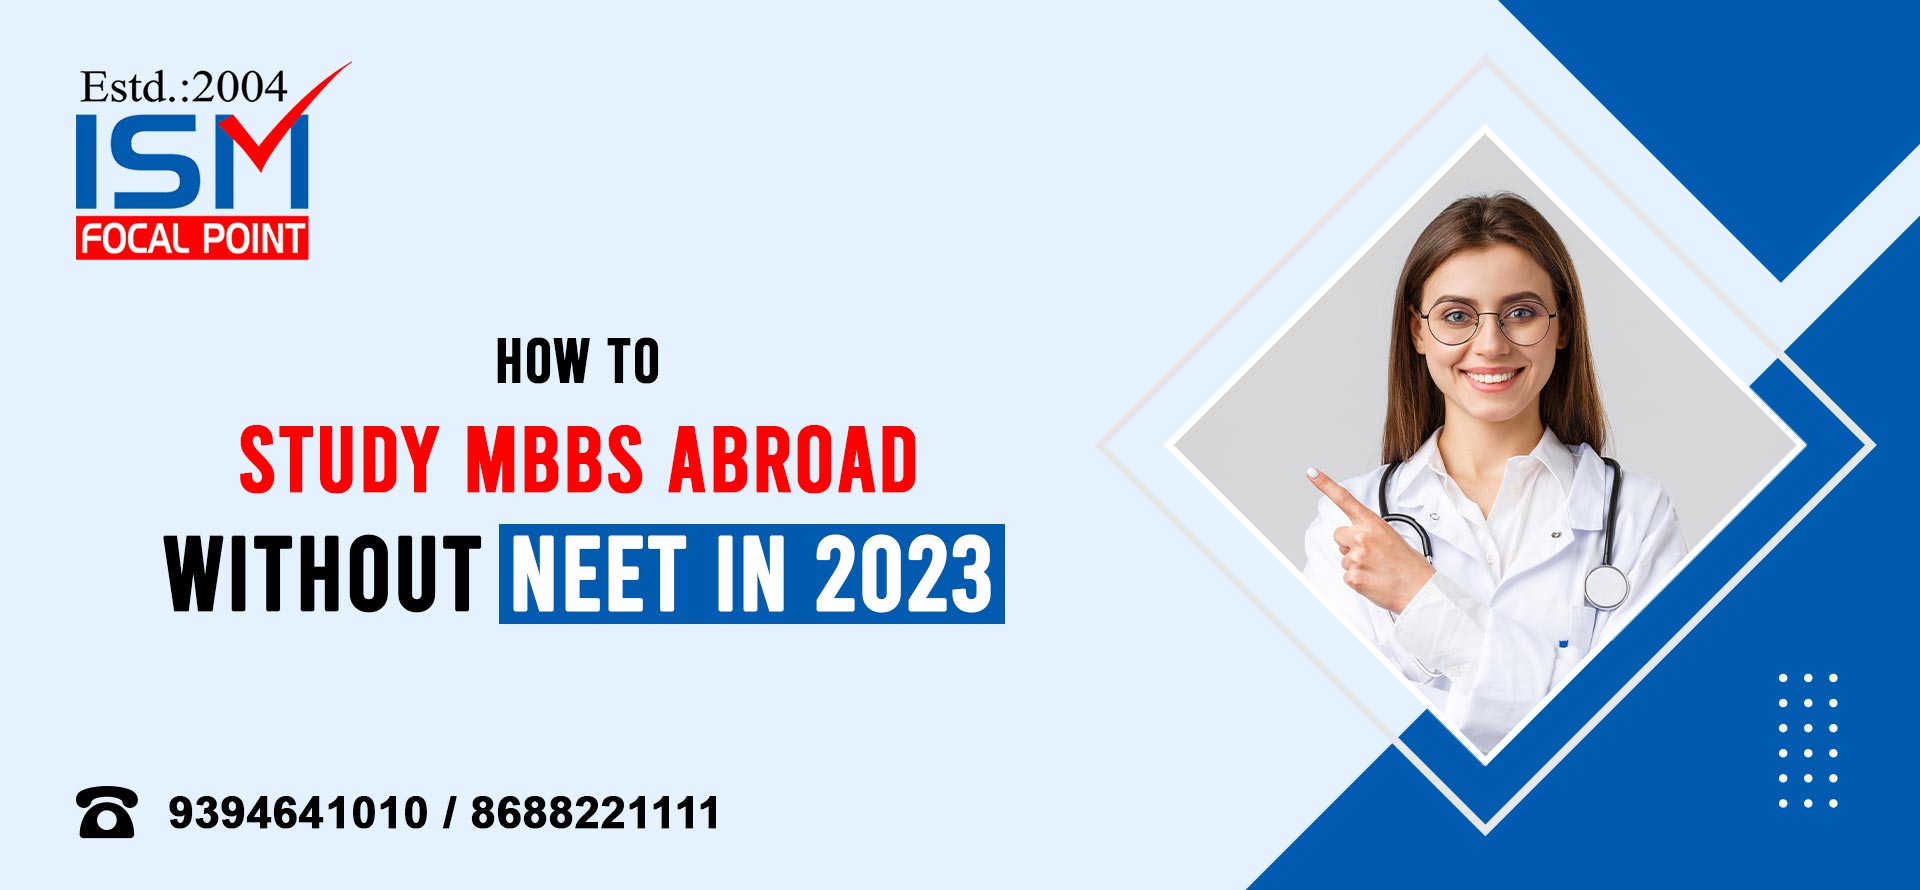 How to Study MBBS Abroad Without NEET in 2023